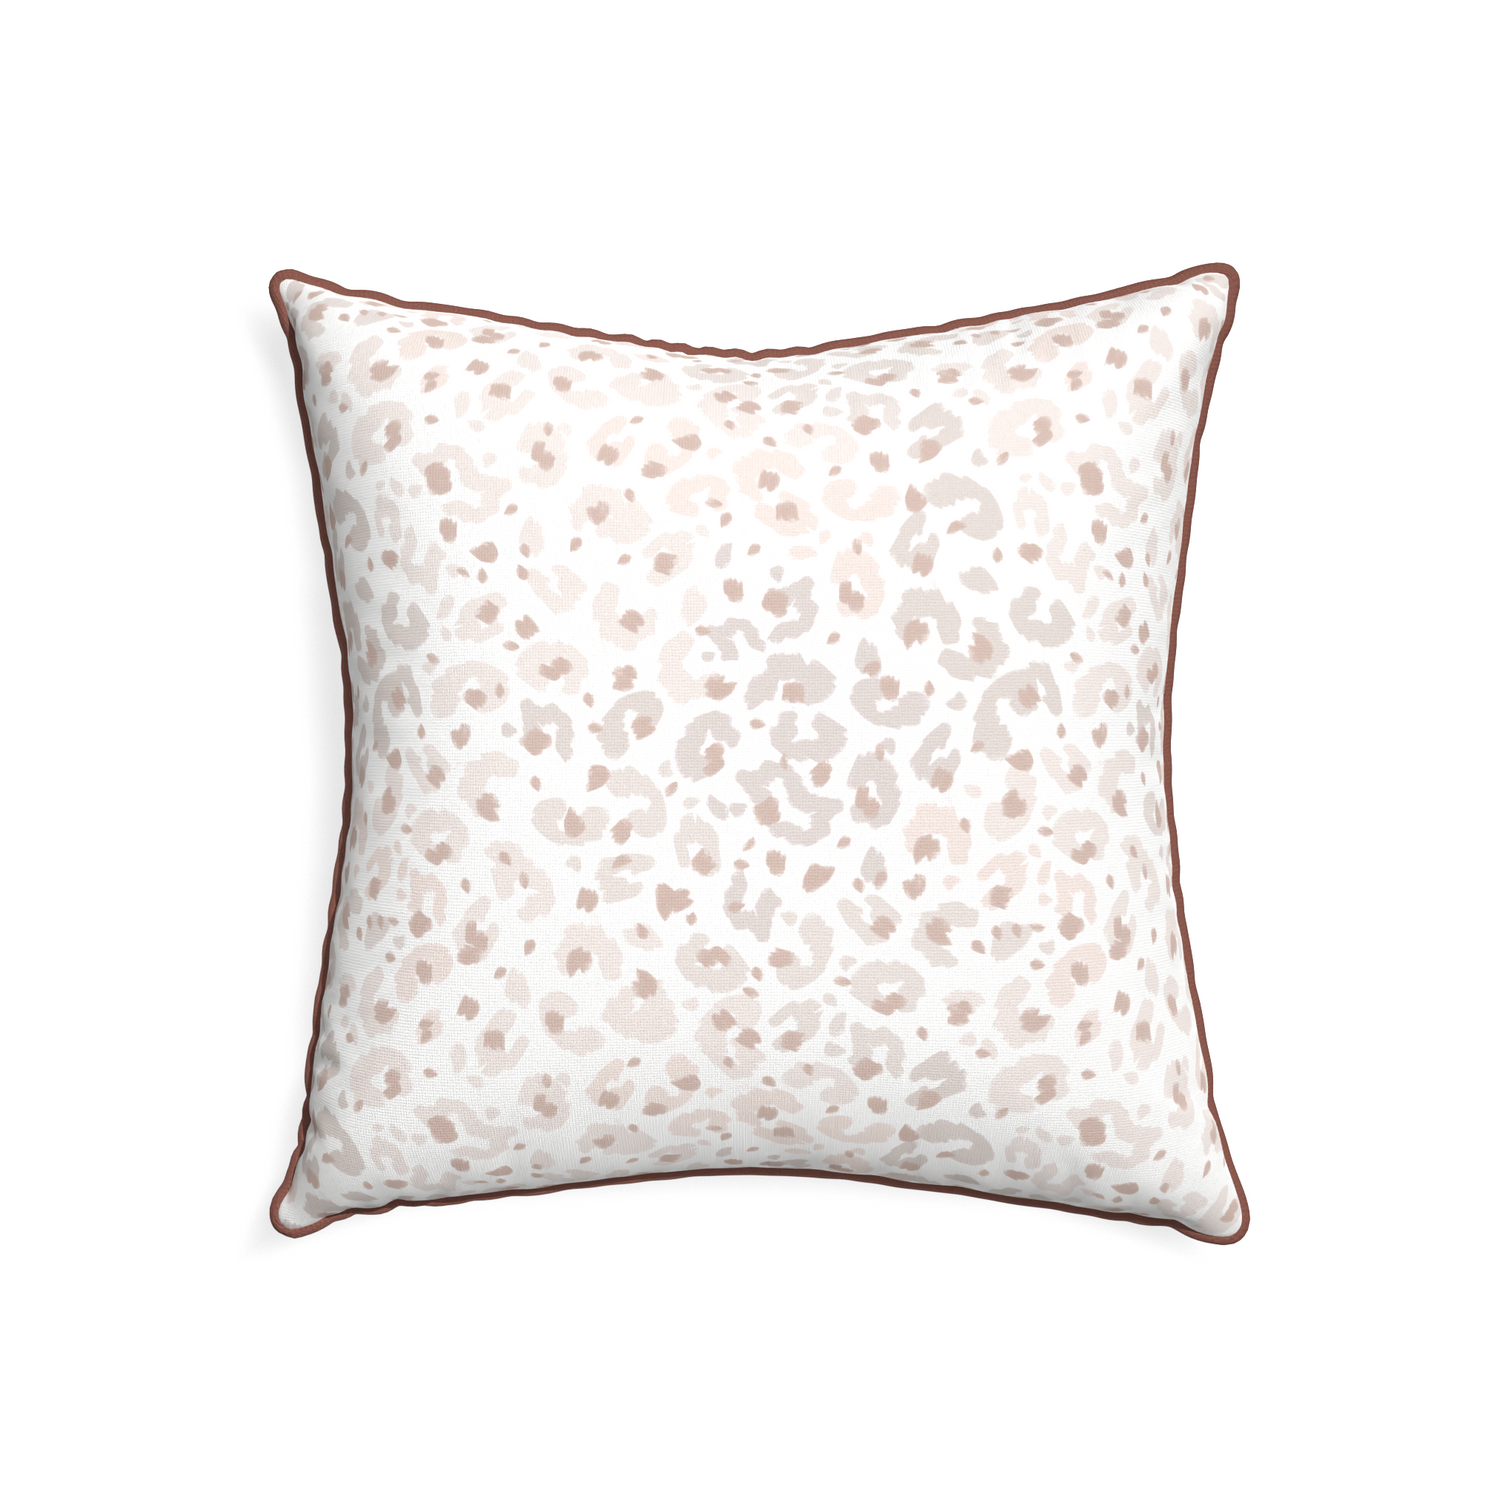 22-square rosie custom pillow with w piping on white background